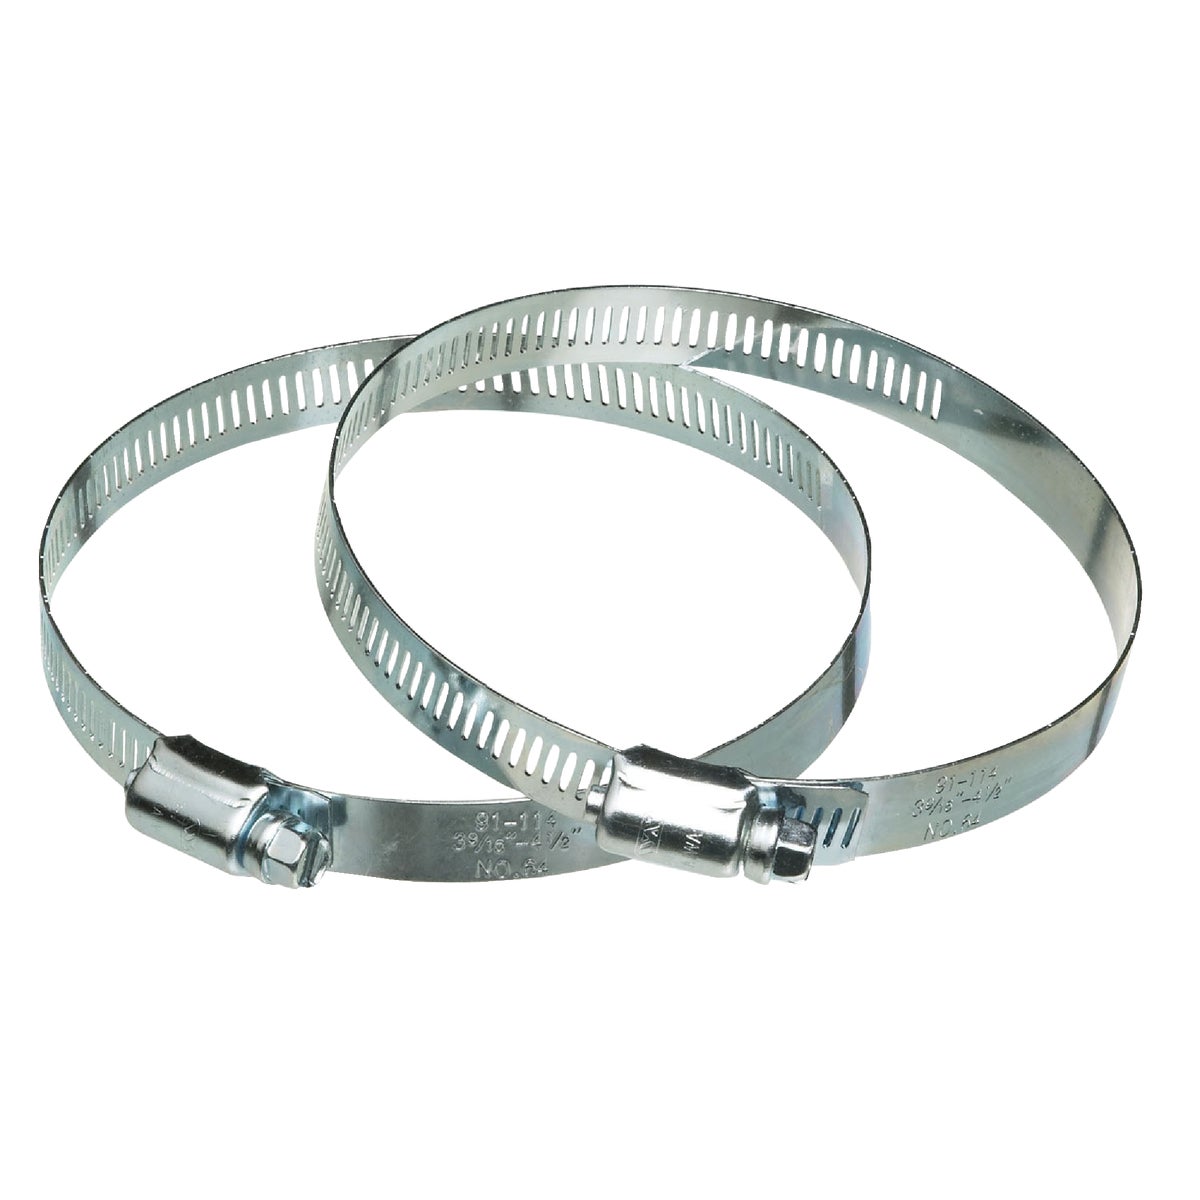 Dundas Jafine 6 In. Metal Duct Clamp